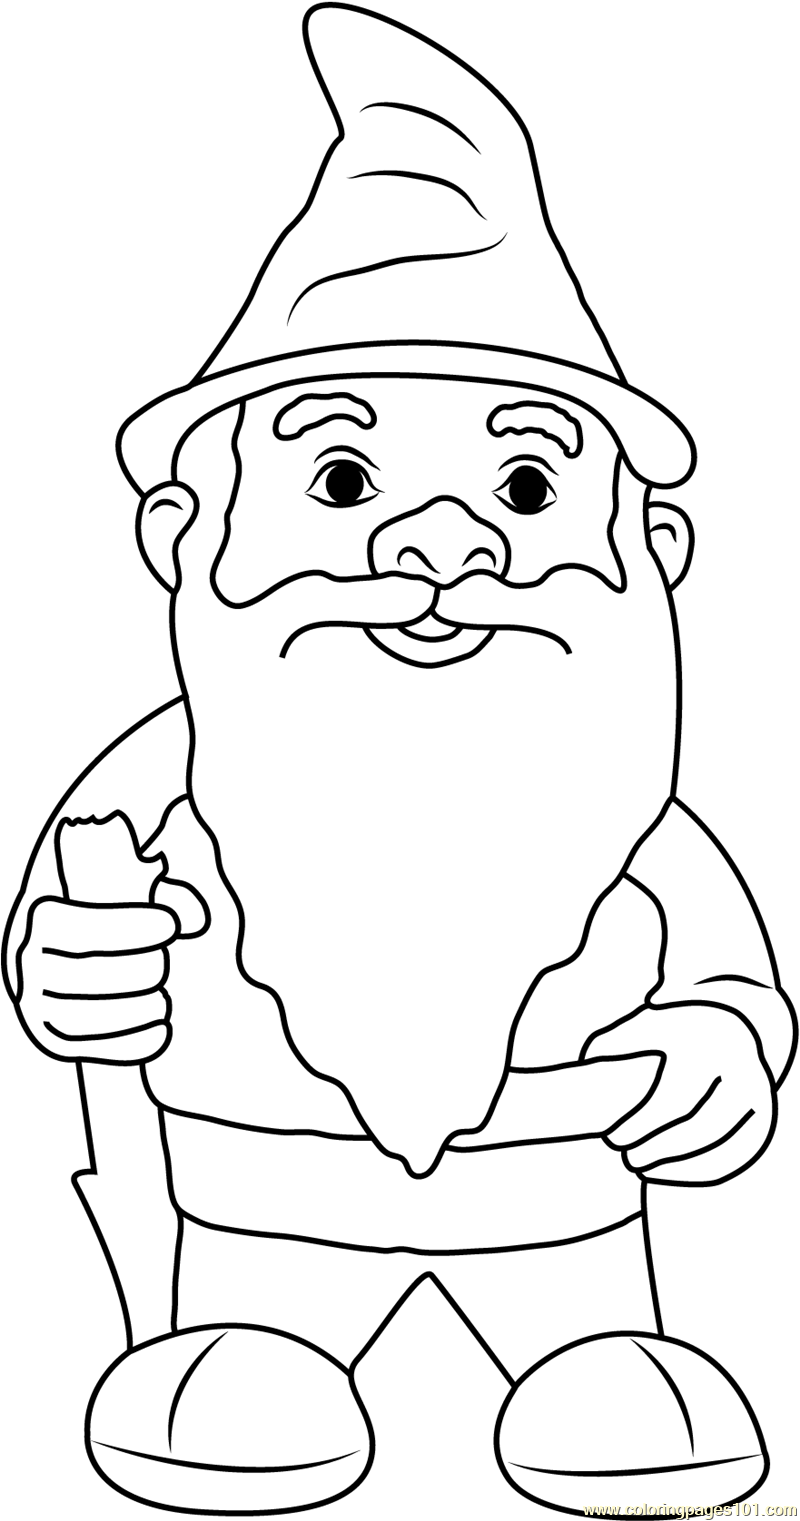 Garden Gnome with Fluffy Beard Coloring Page Free Gnomeo & Juliet